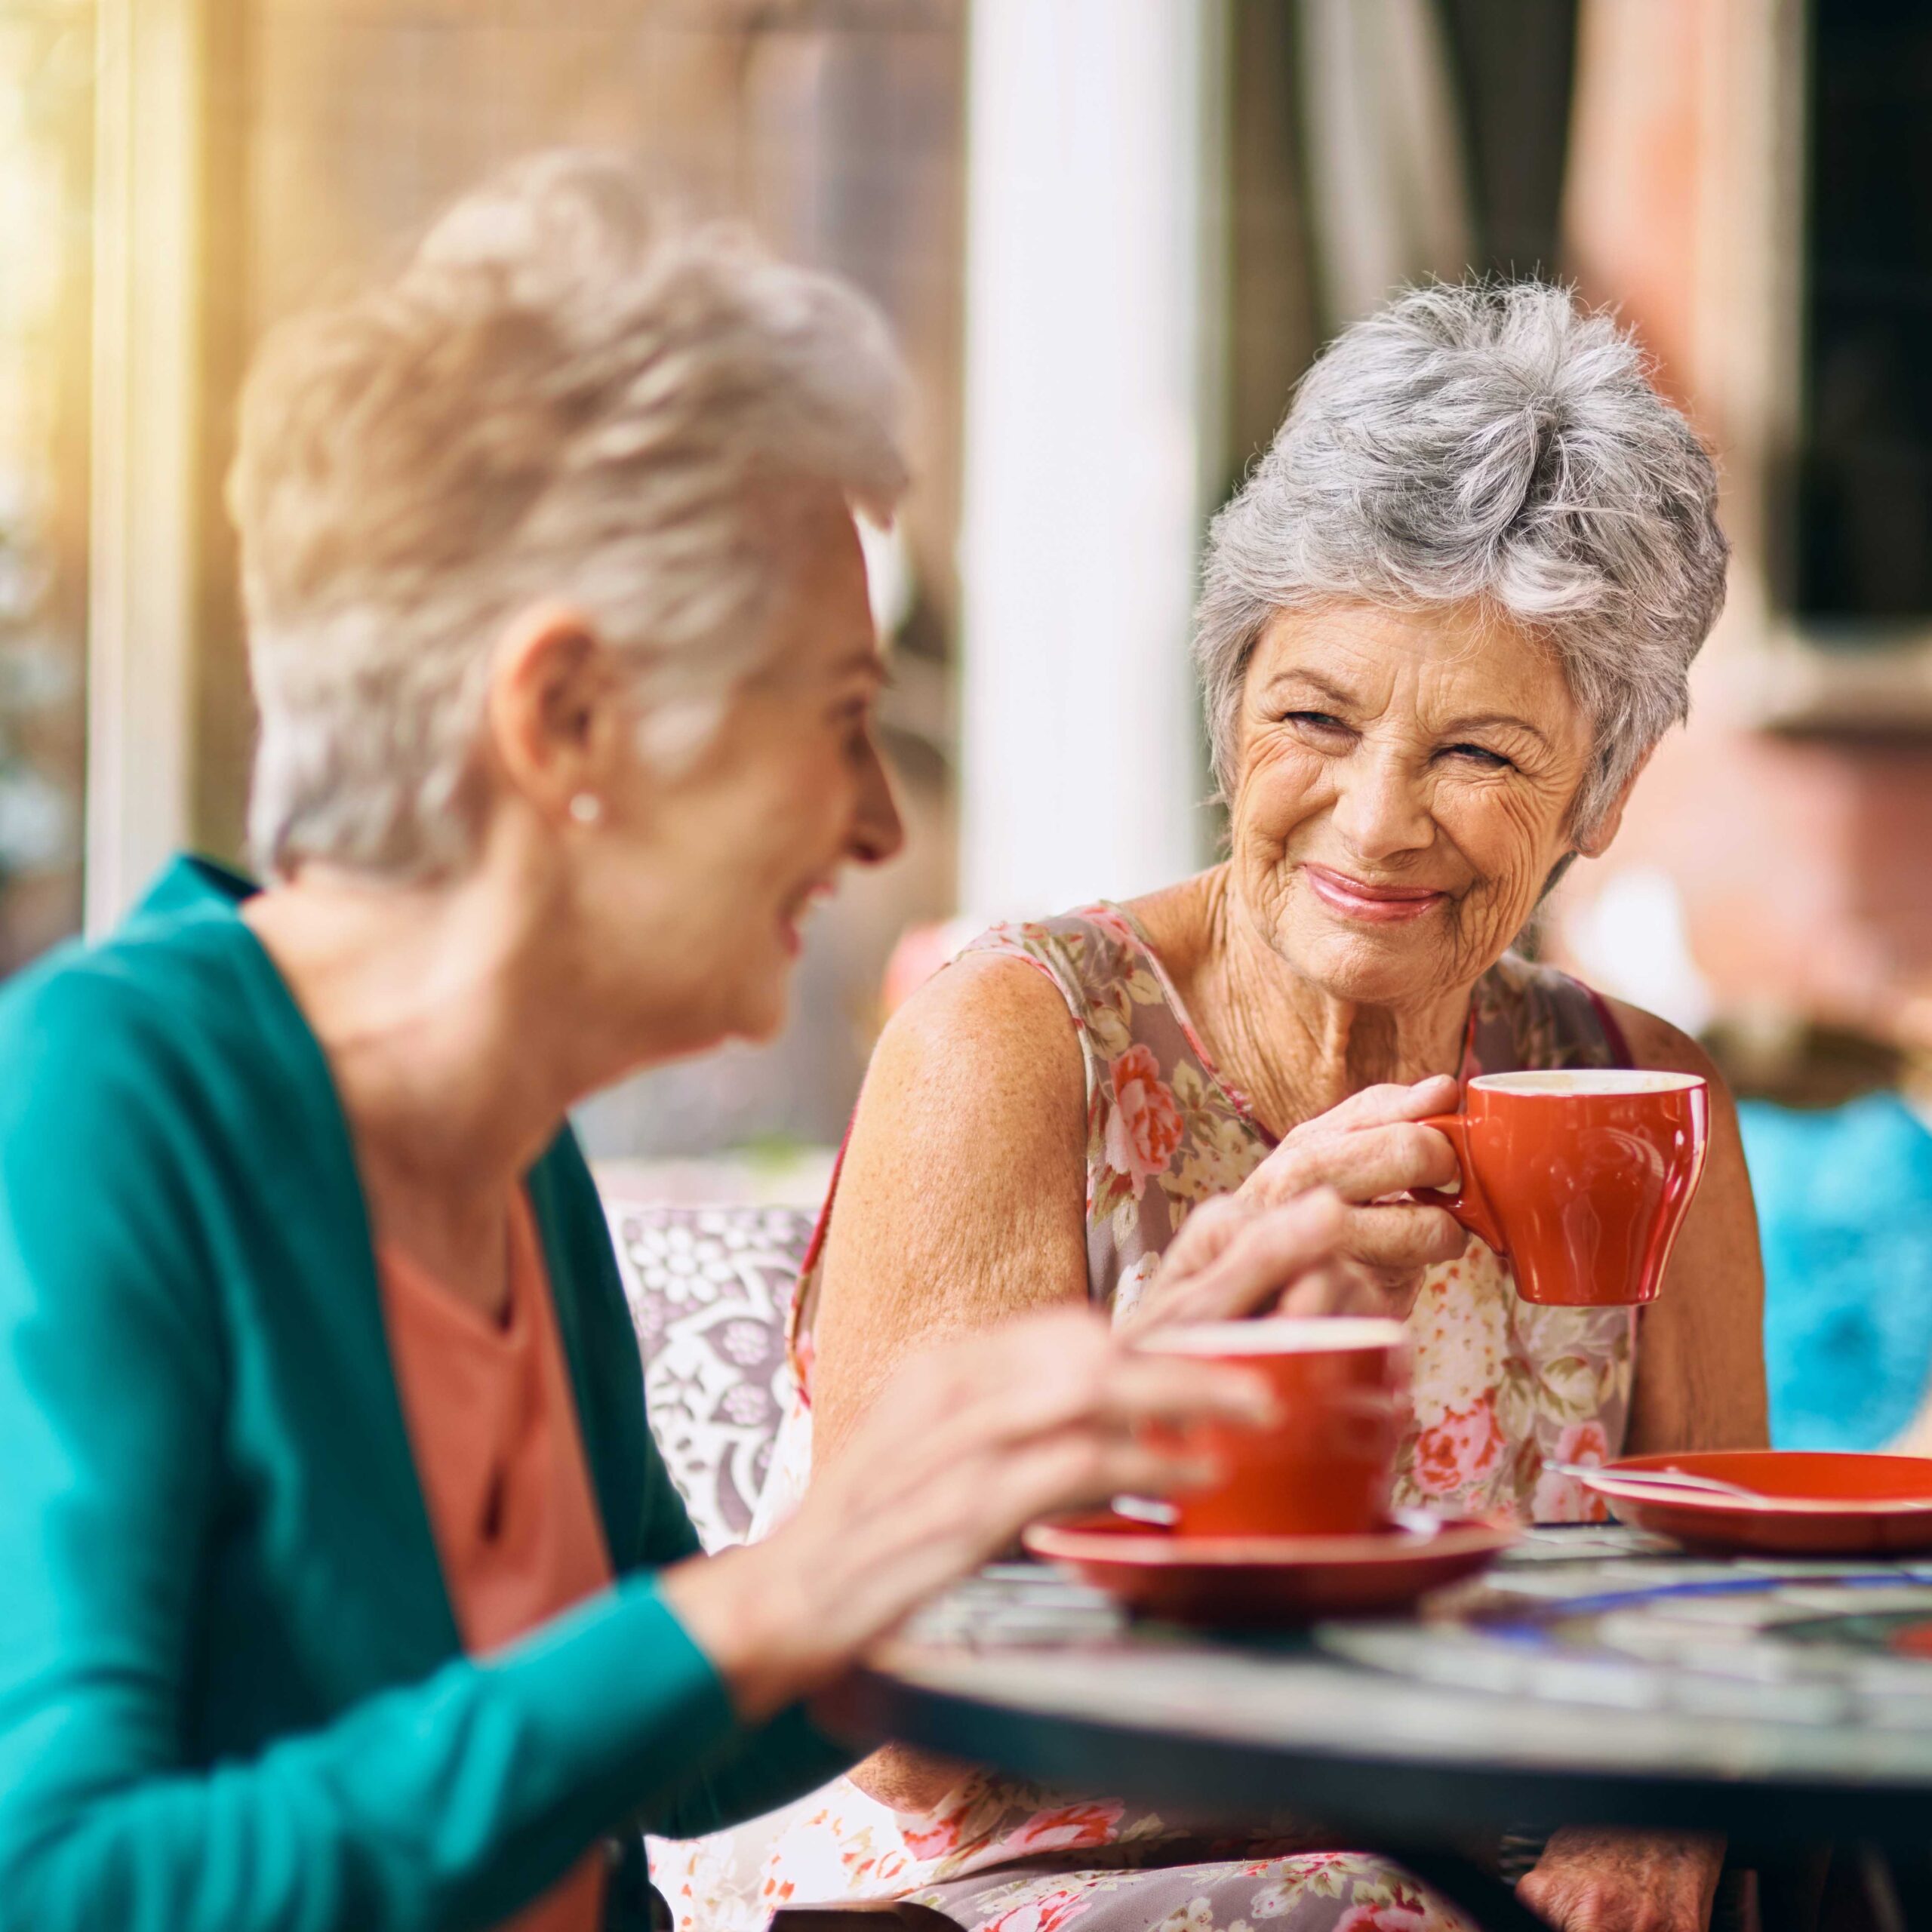 Two older women, residing in a retirement home, sitting at a table and drinking coffee.